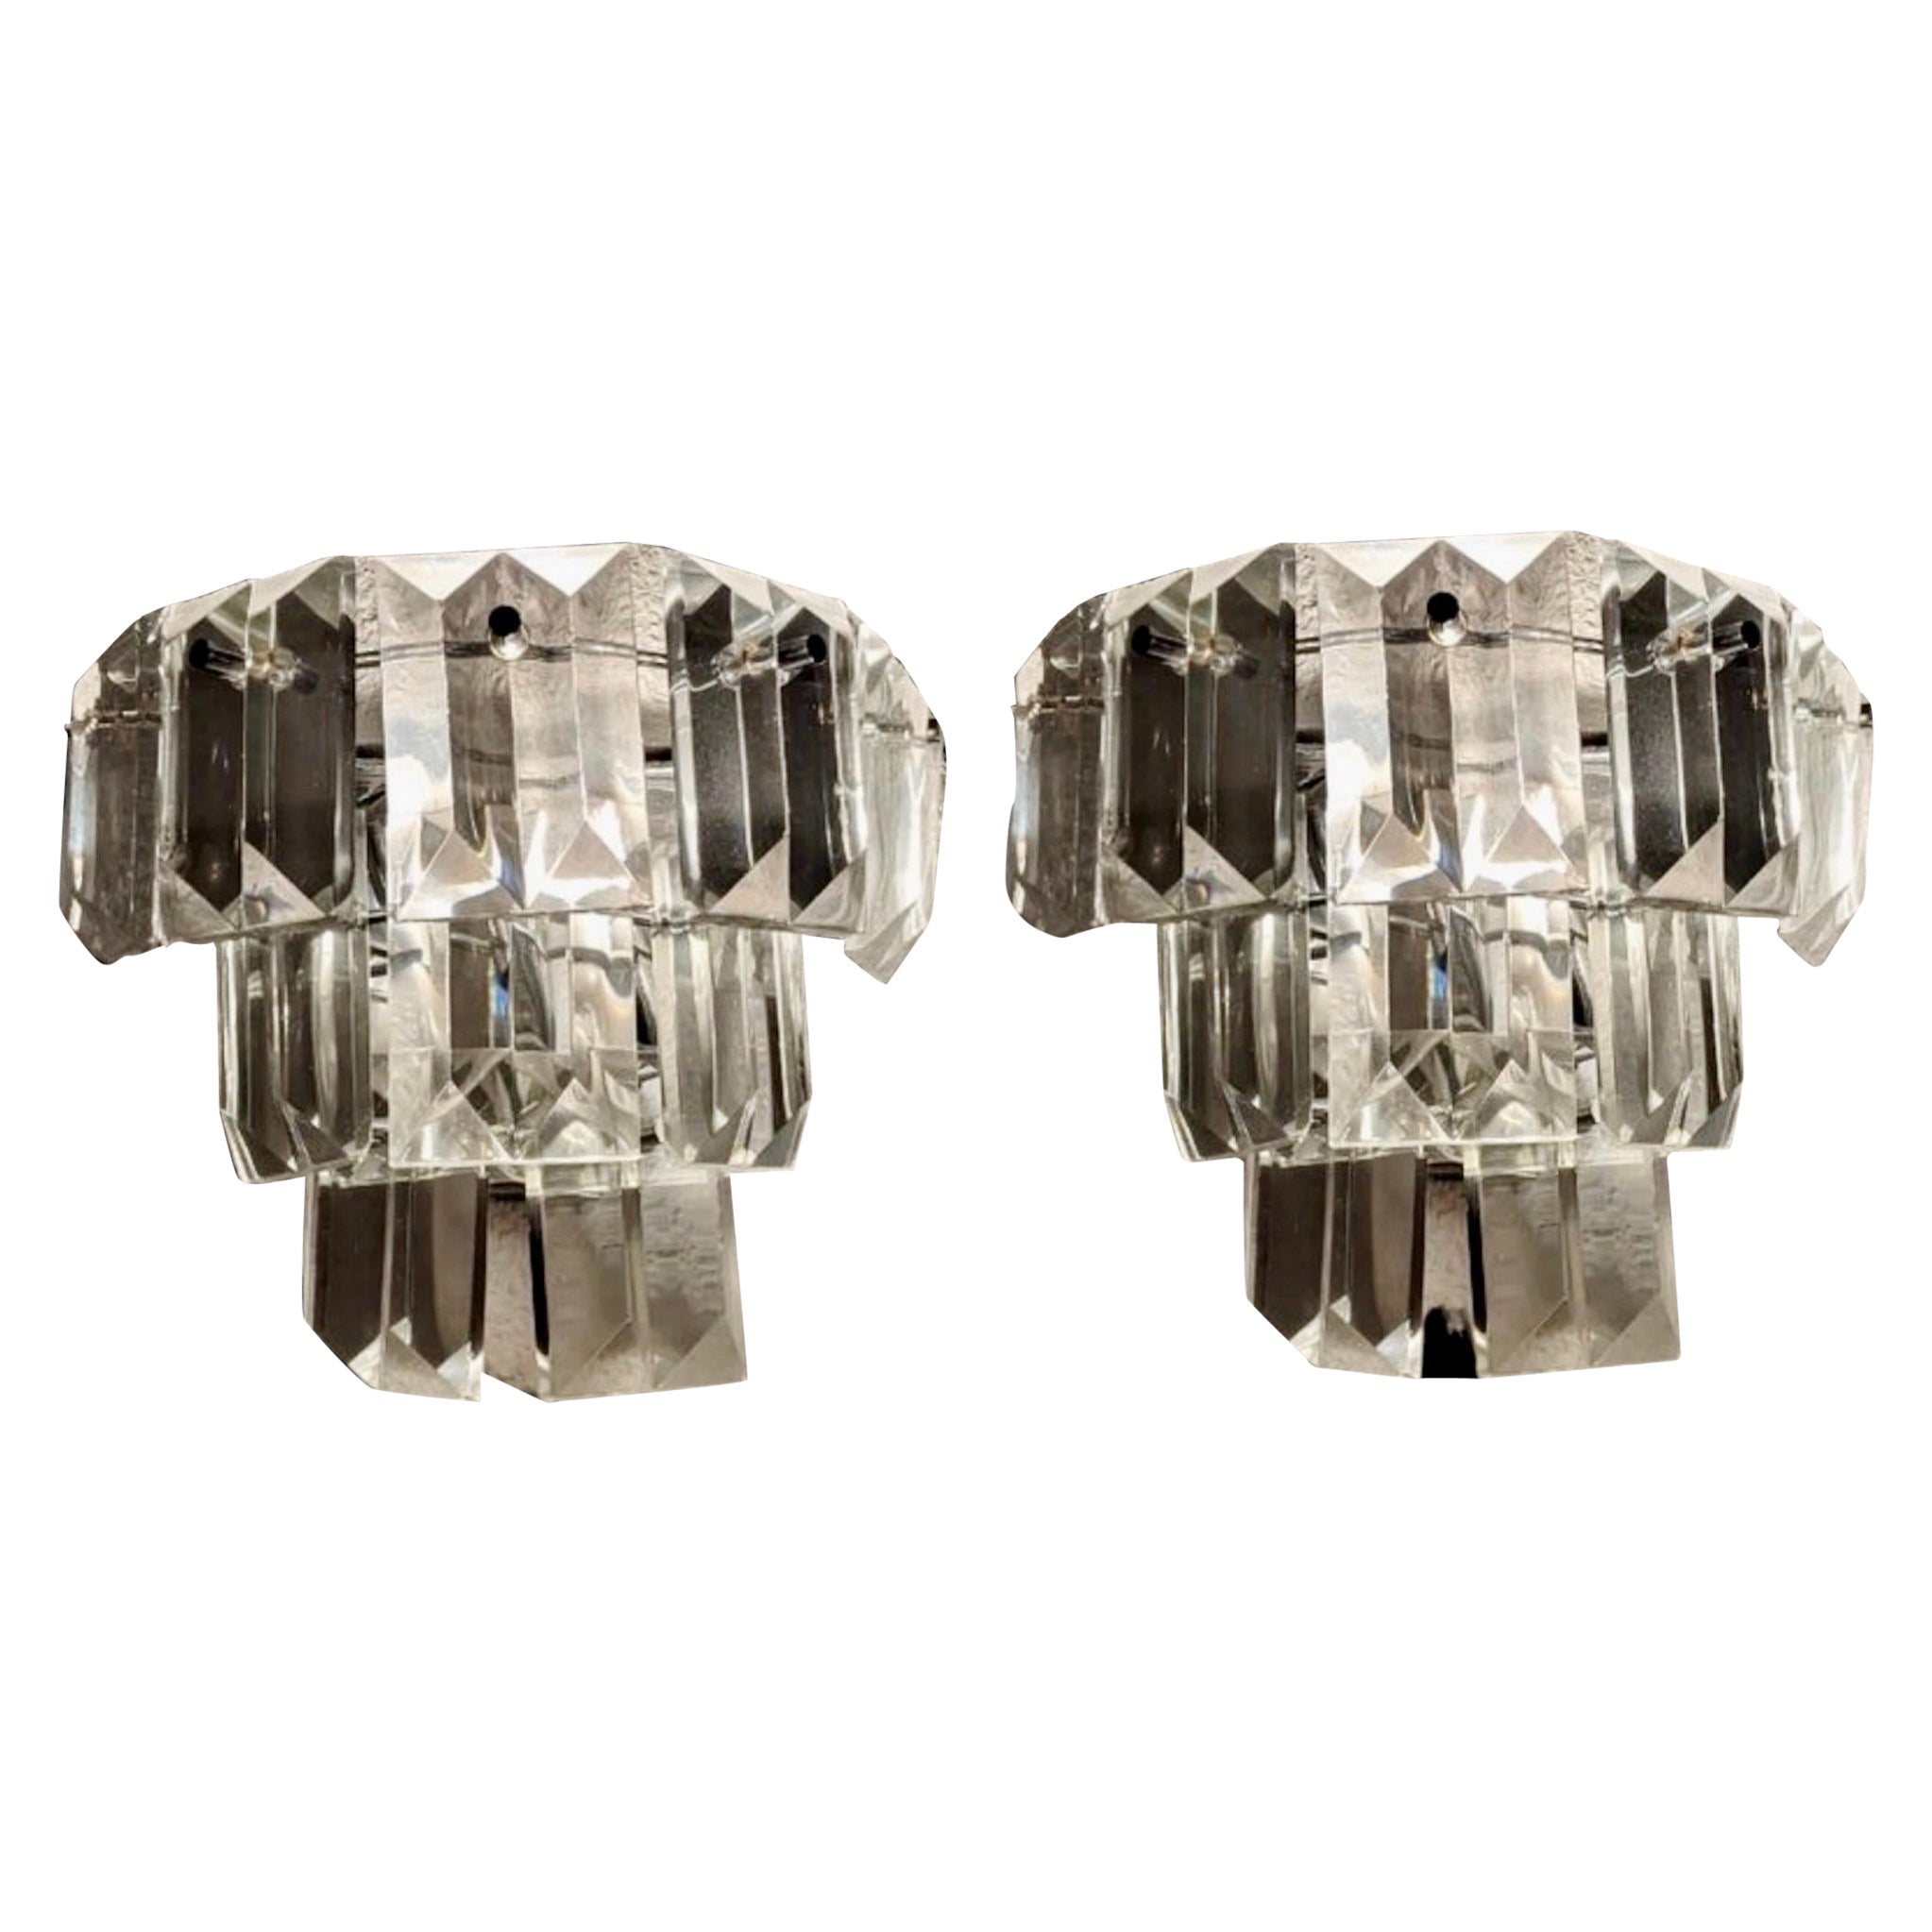 Kinkeldey Wall Lighting Glass Cut PAIR with Brass Structure, Austria, 1970 For Sale